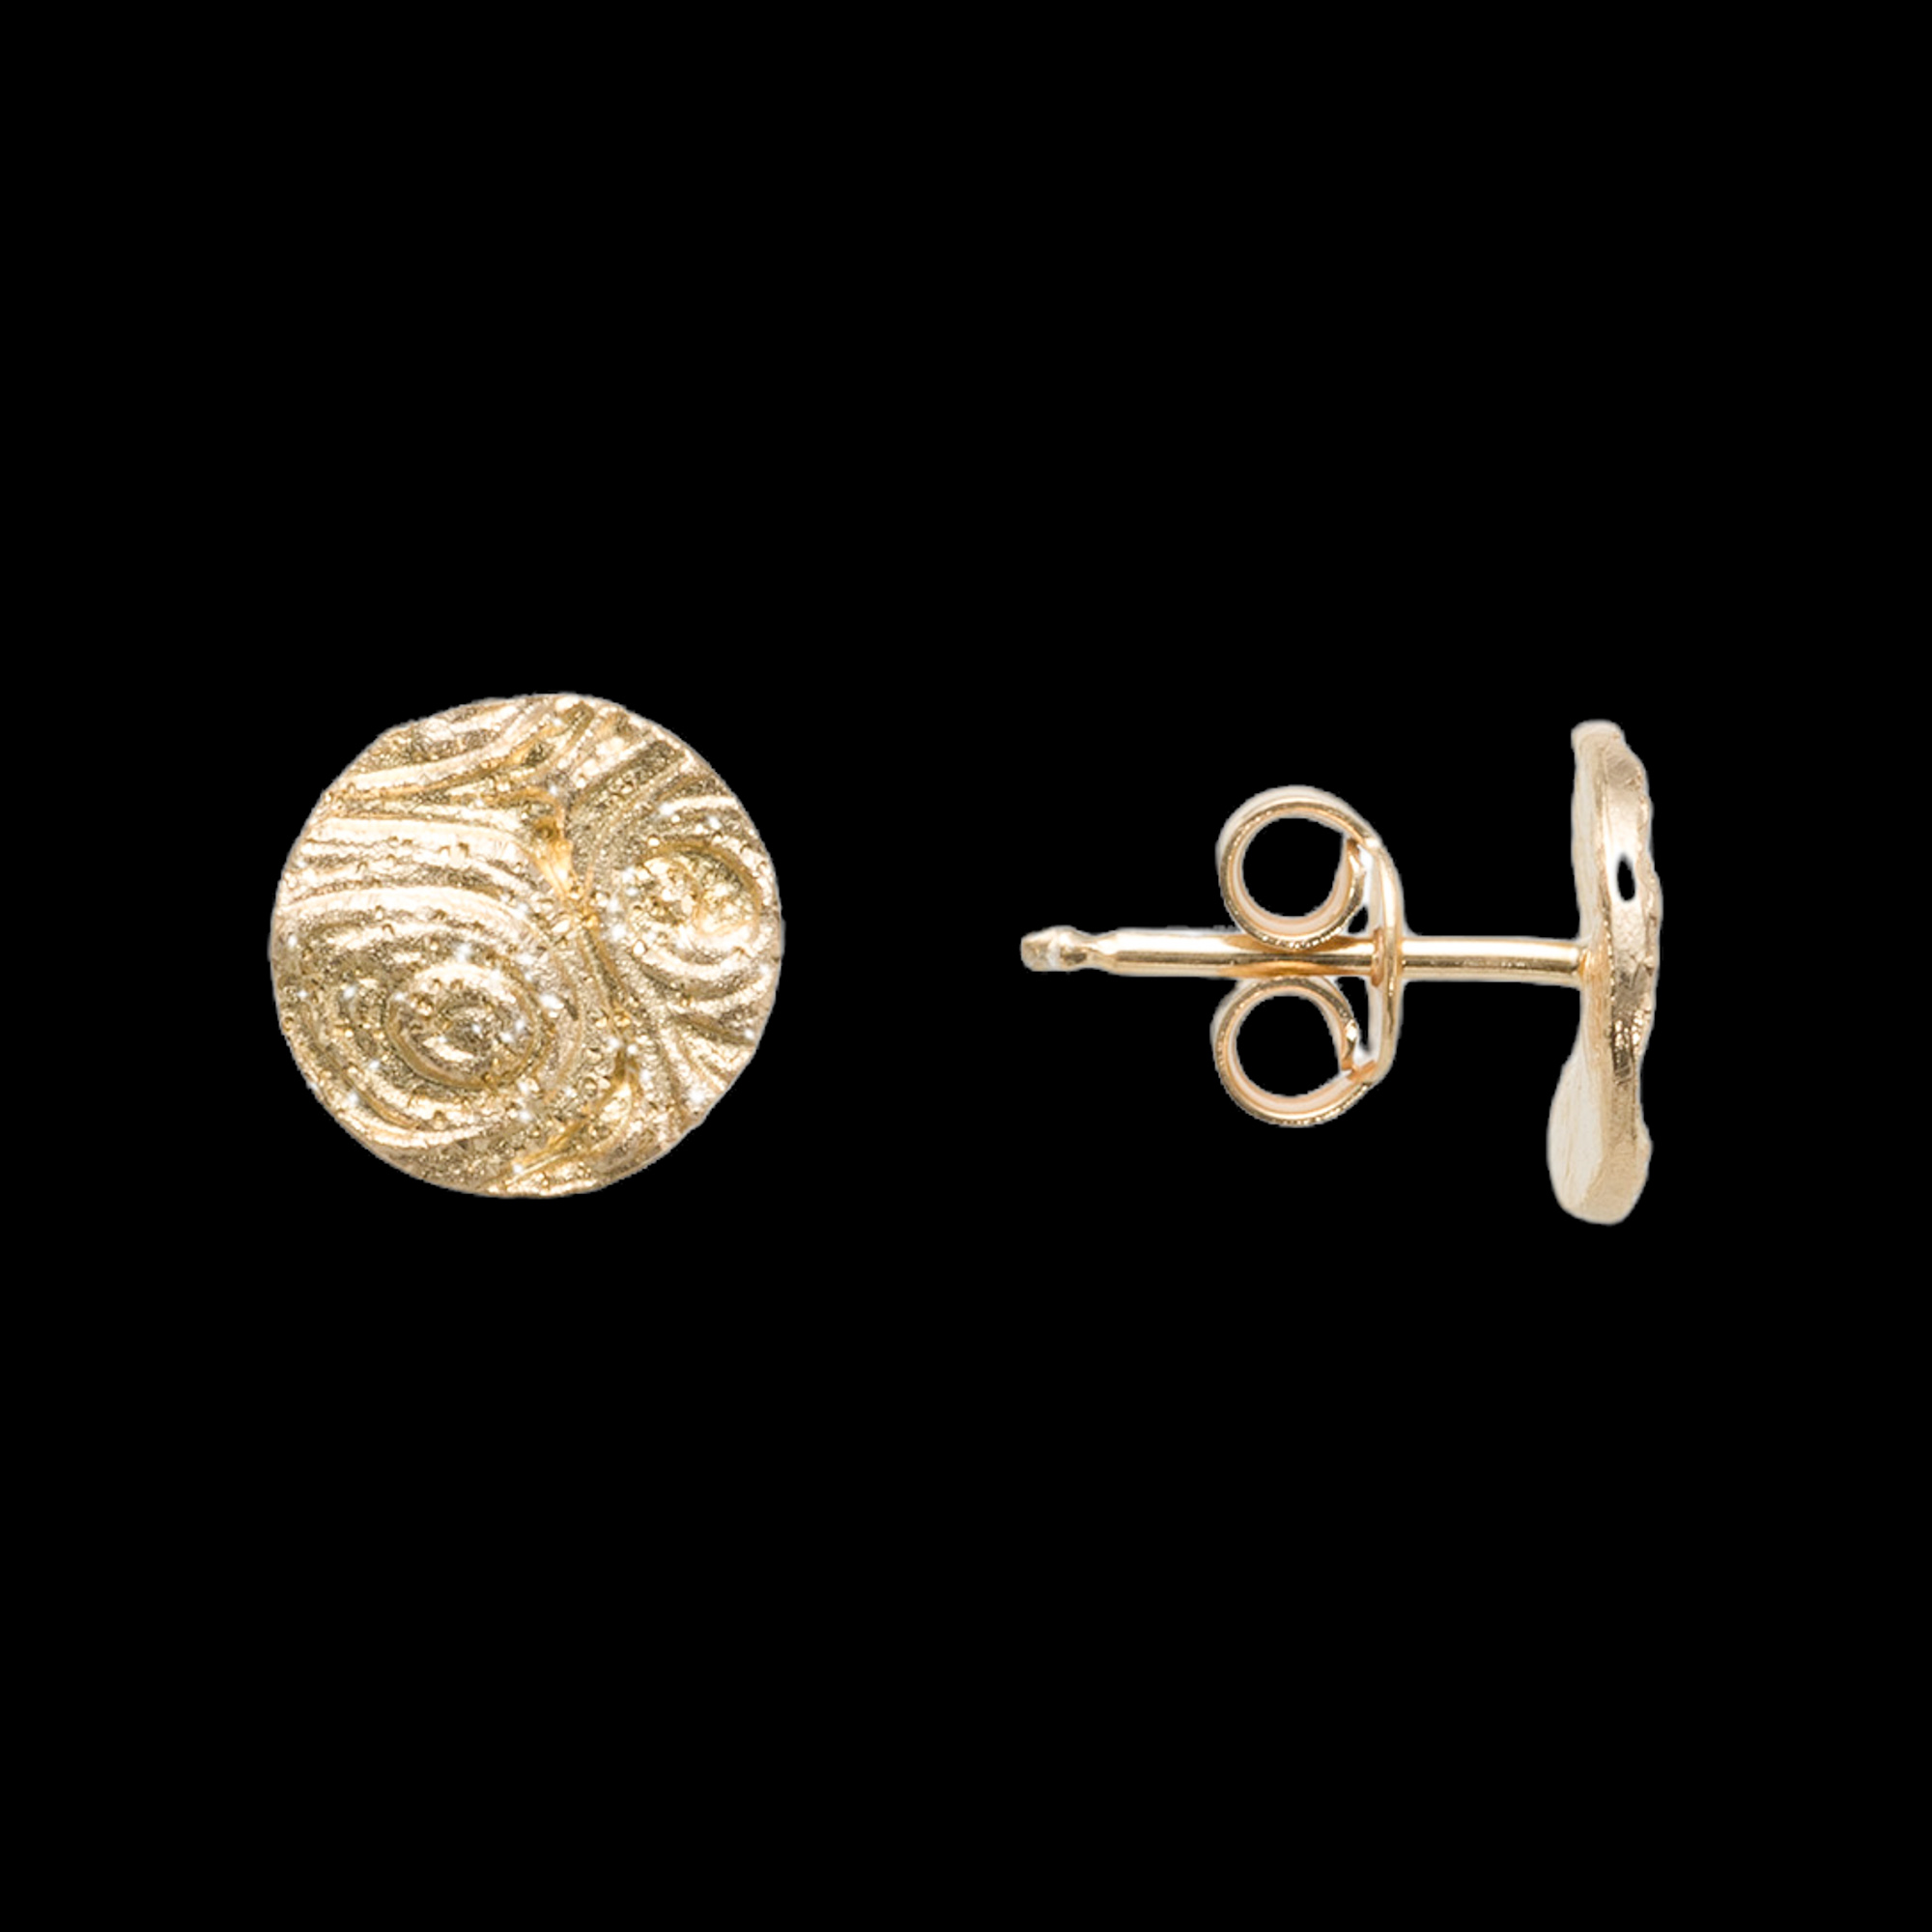 Round and small gilt -and -tuned earrings